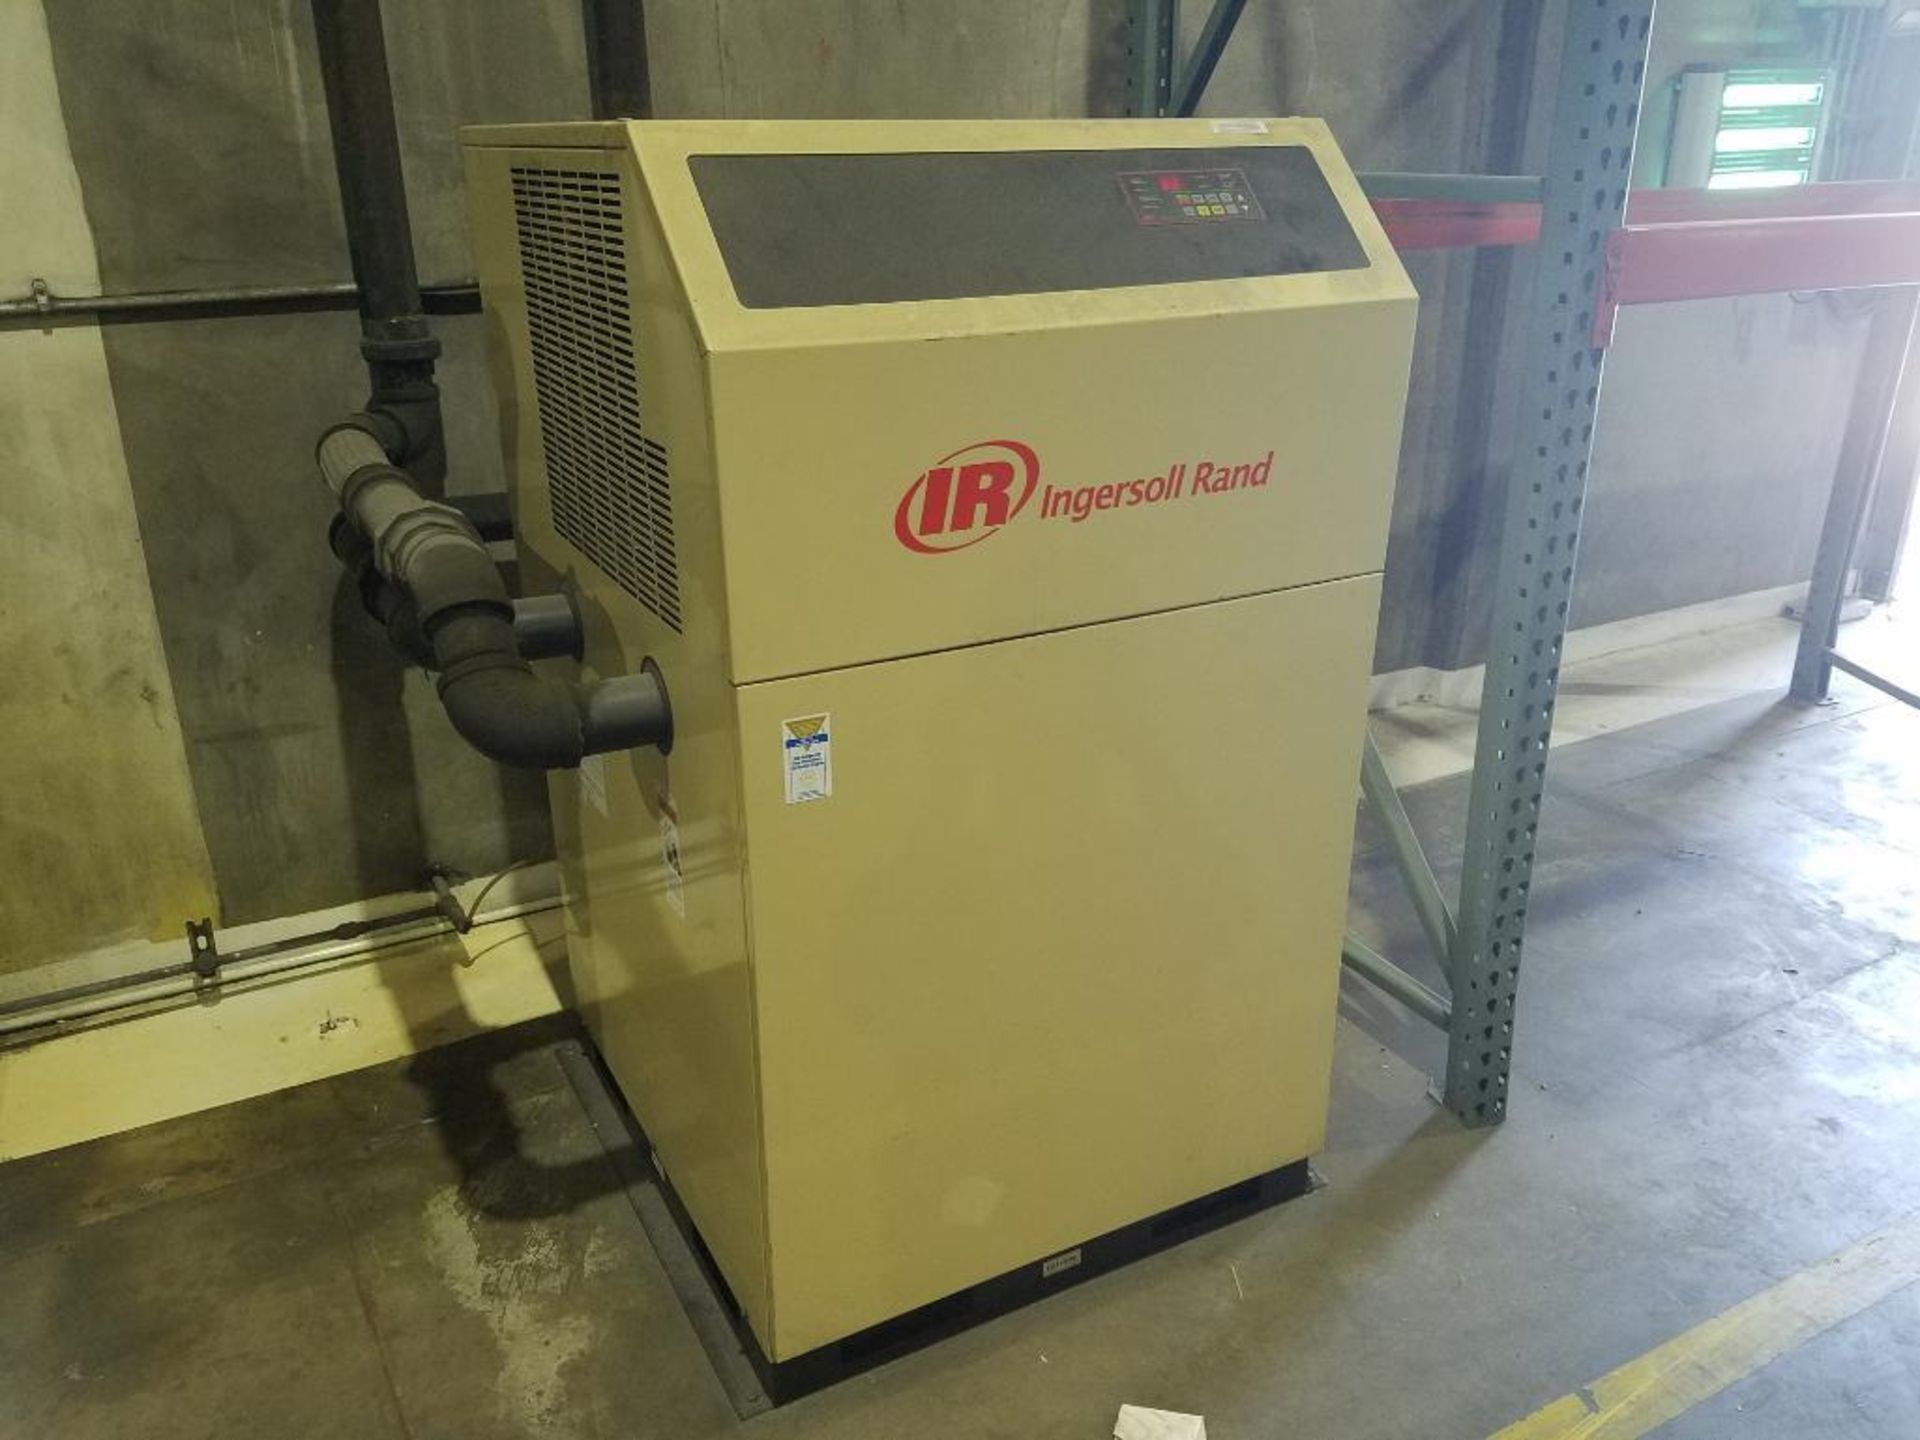 Ingersoll Rand refrigerated air dryer - Image 2 of 4